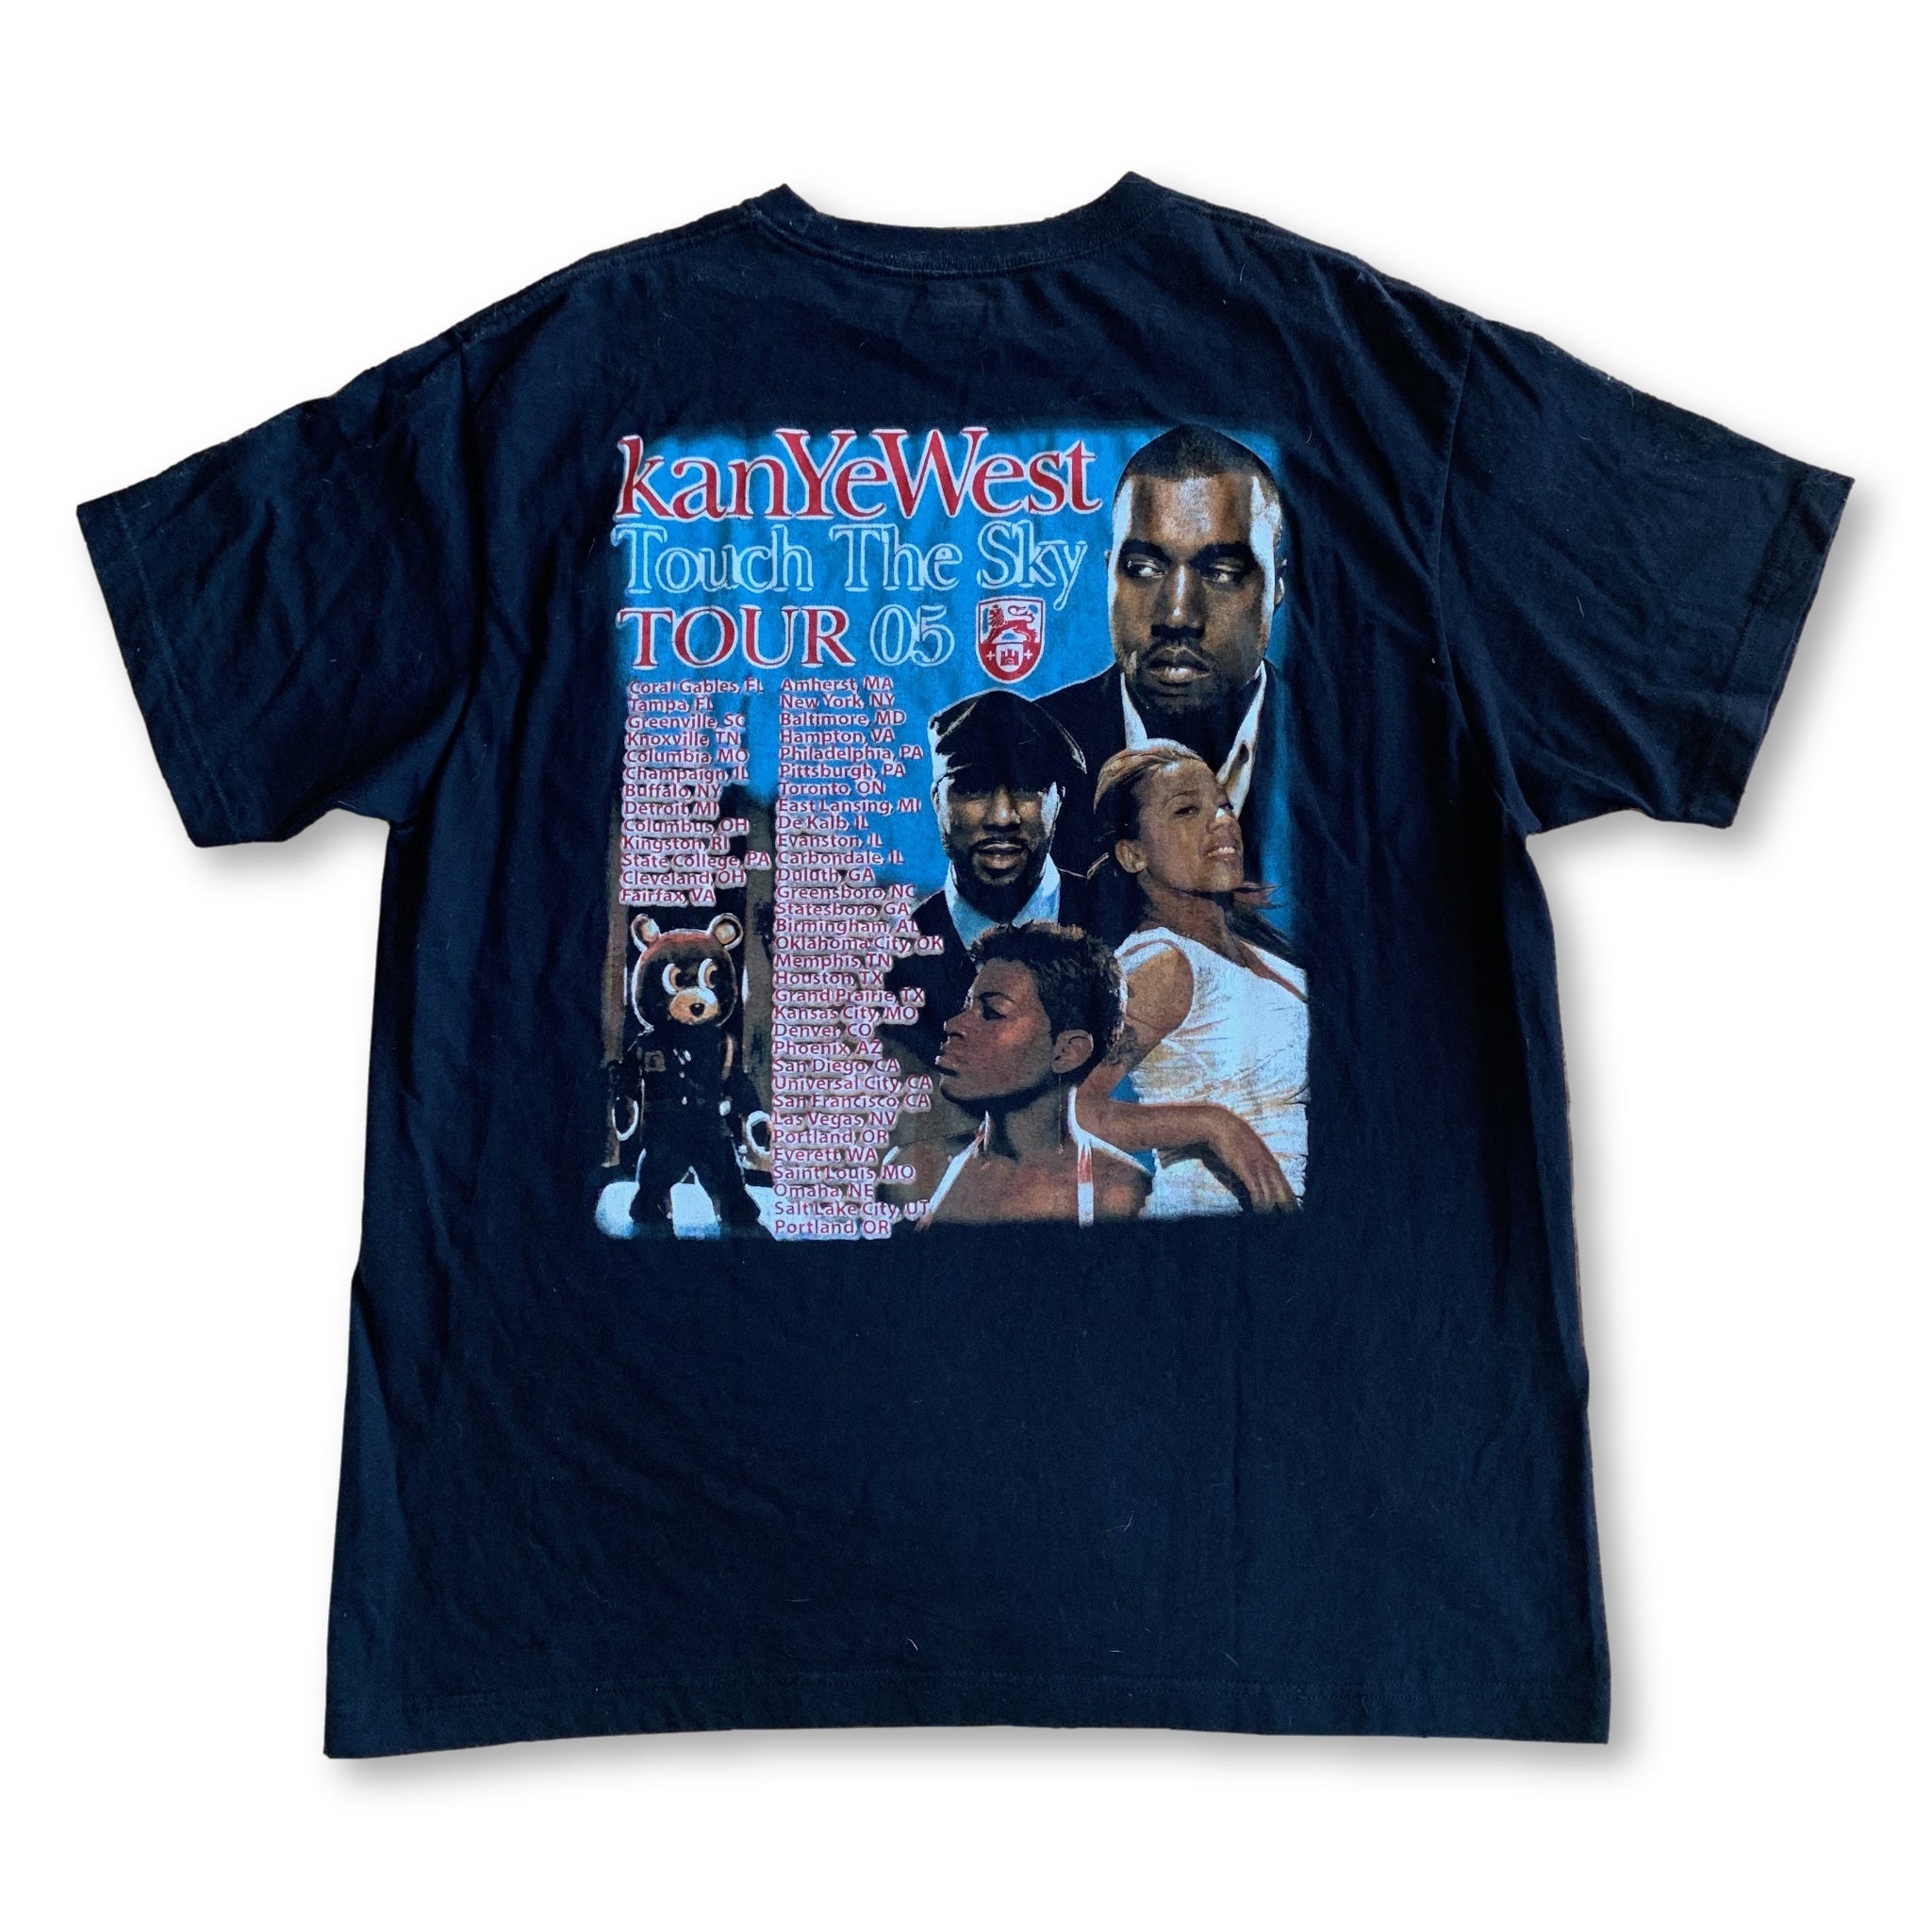 Kanye West Touch The Sky Tour Shirt - XL